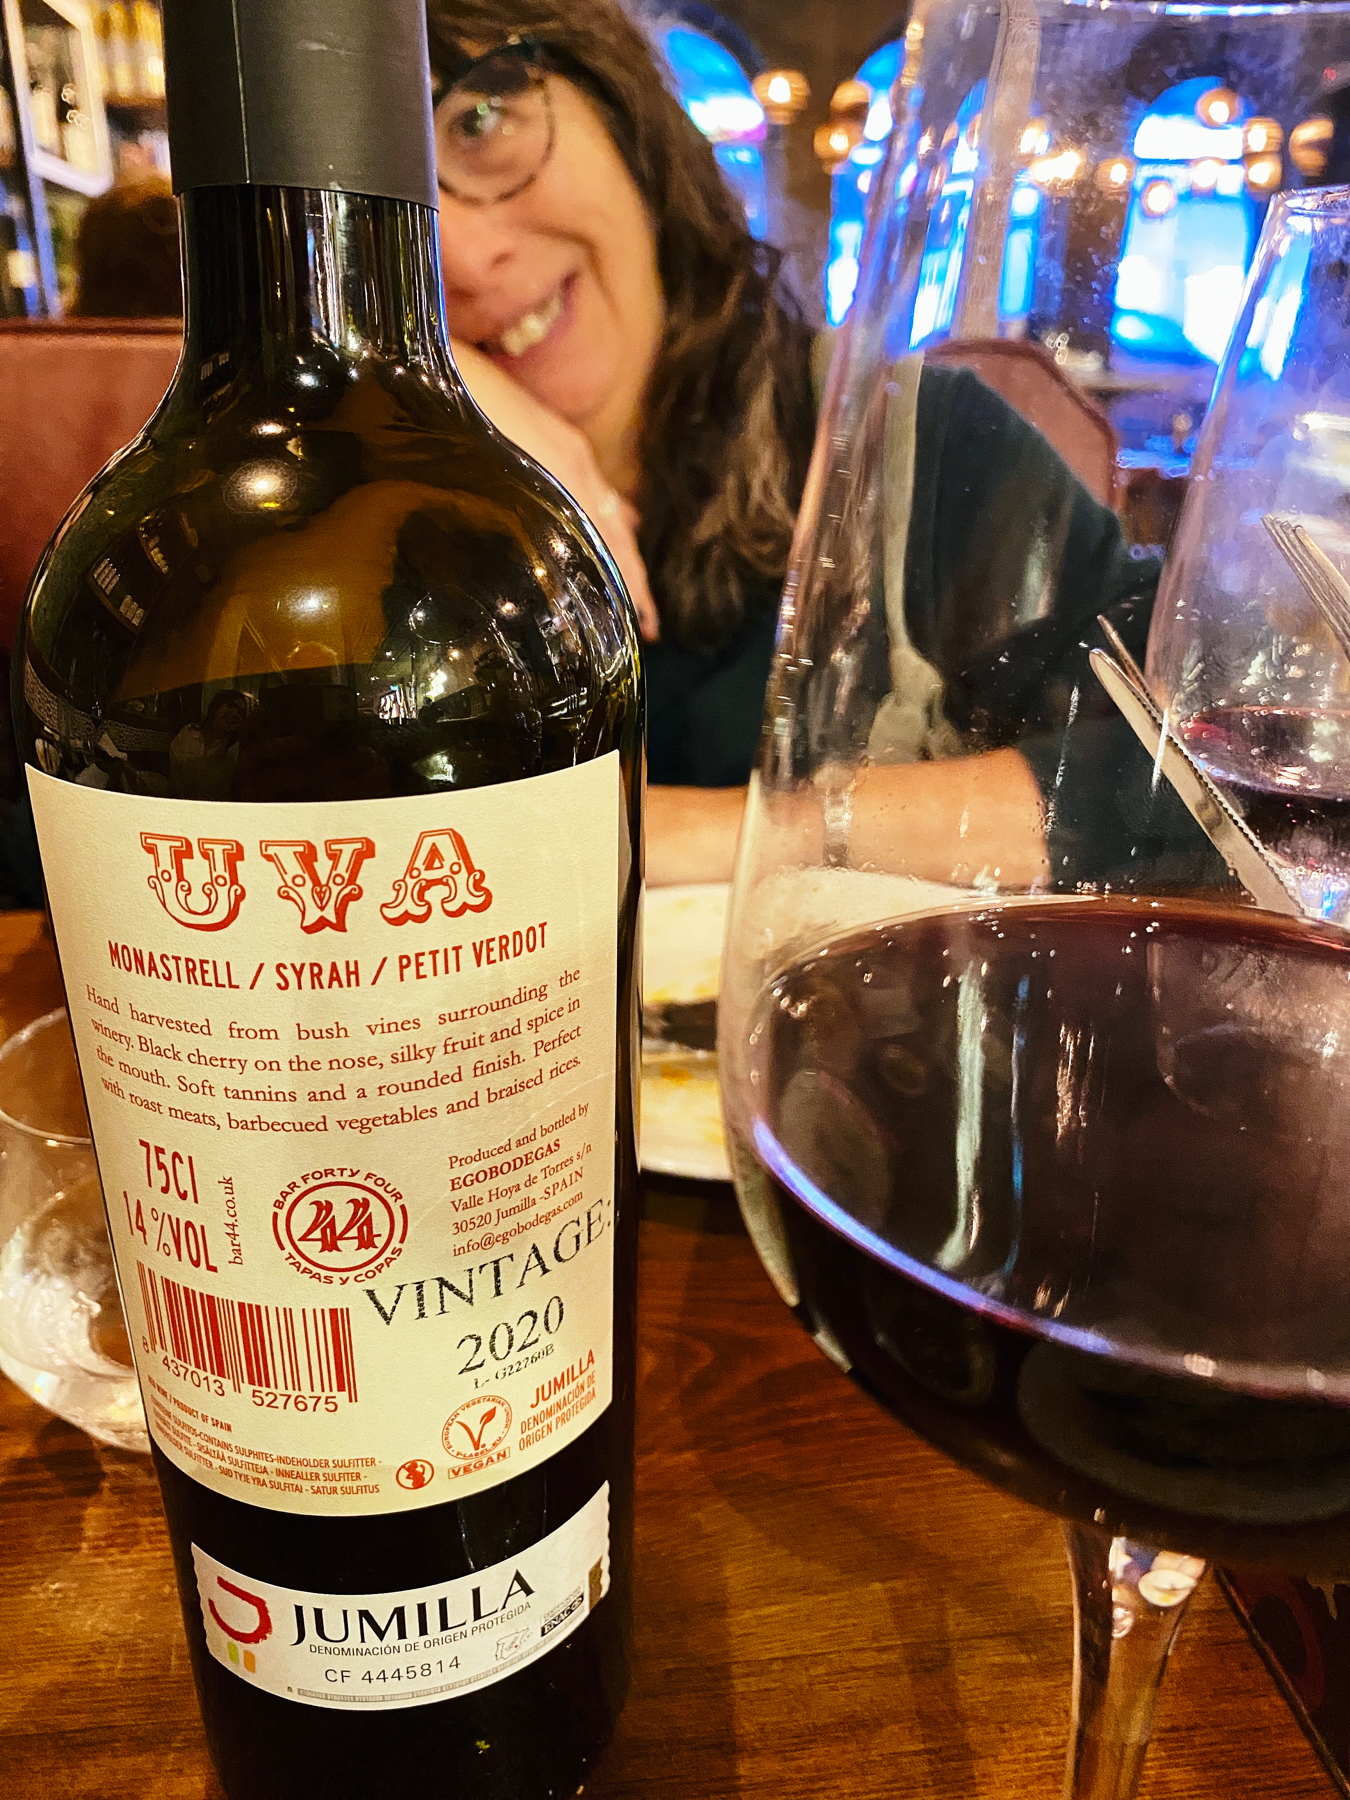 Red wine bottle and glass in foreground, smiling woman in background